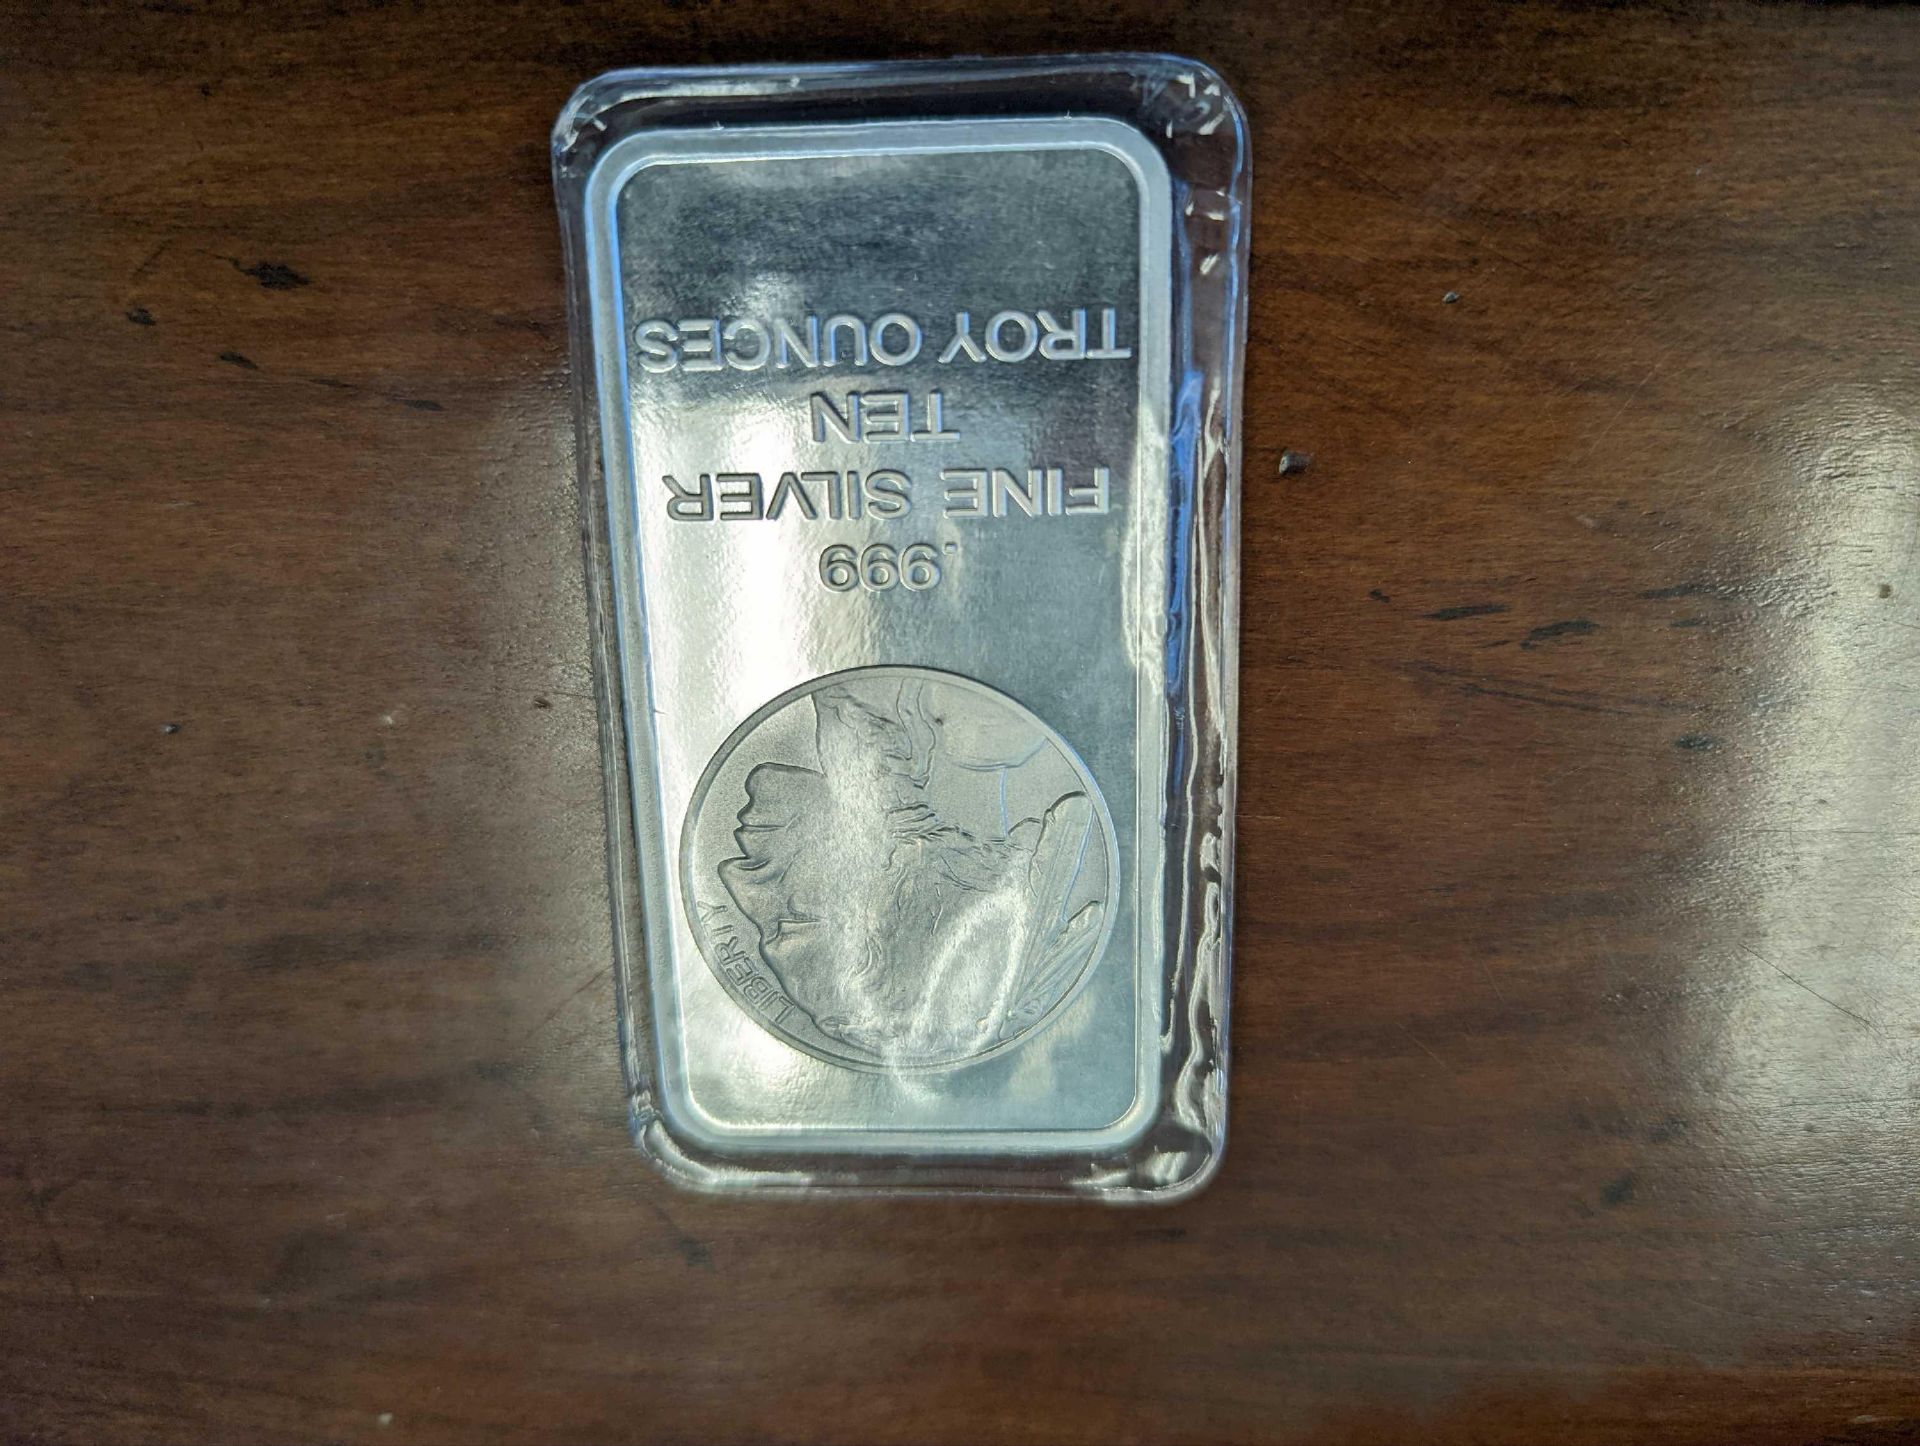 10 oz Indian Head Silver Bar - Image 2 of 4